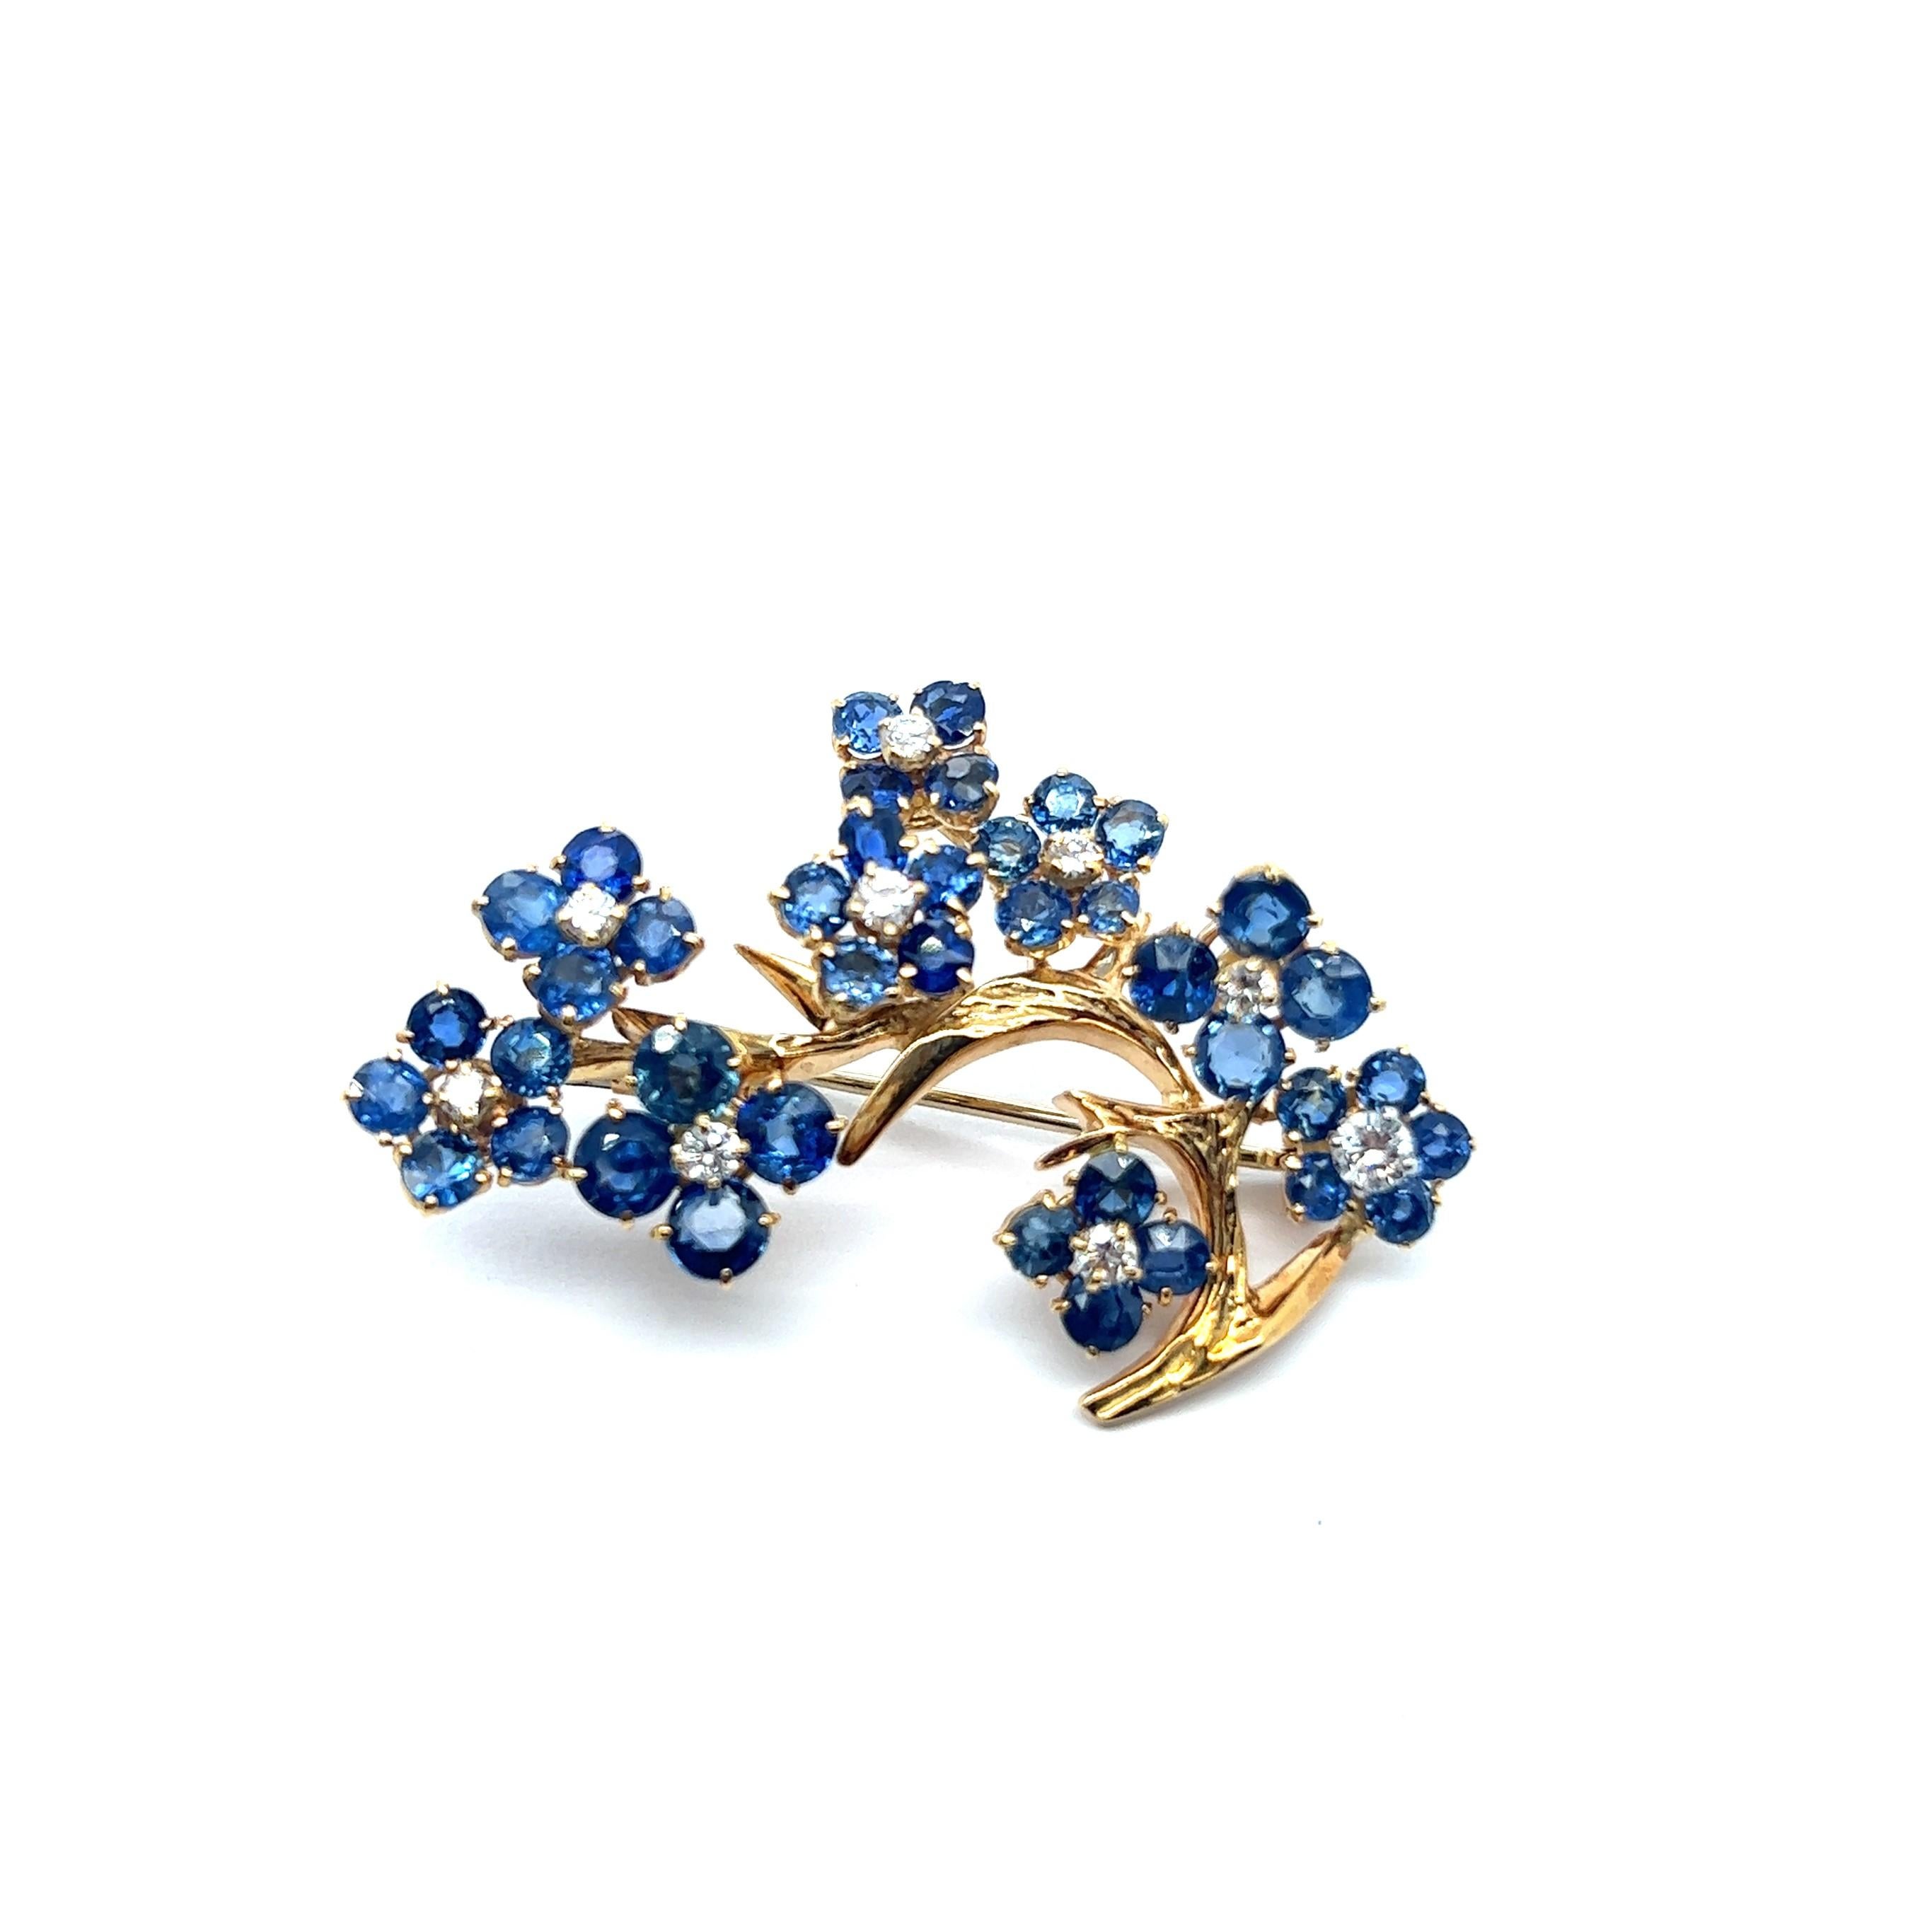 An exquisite brooch with sapphire and diamonds by legendary Swiss Jewelry House Gübelin. The company is celebrated for its illustrious heritage in the world of gemstones and has a legacy spanning generations. 

This golden branch is crafted from 18